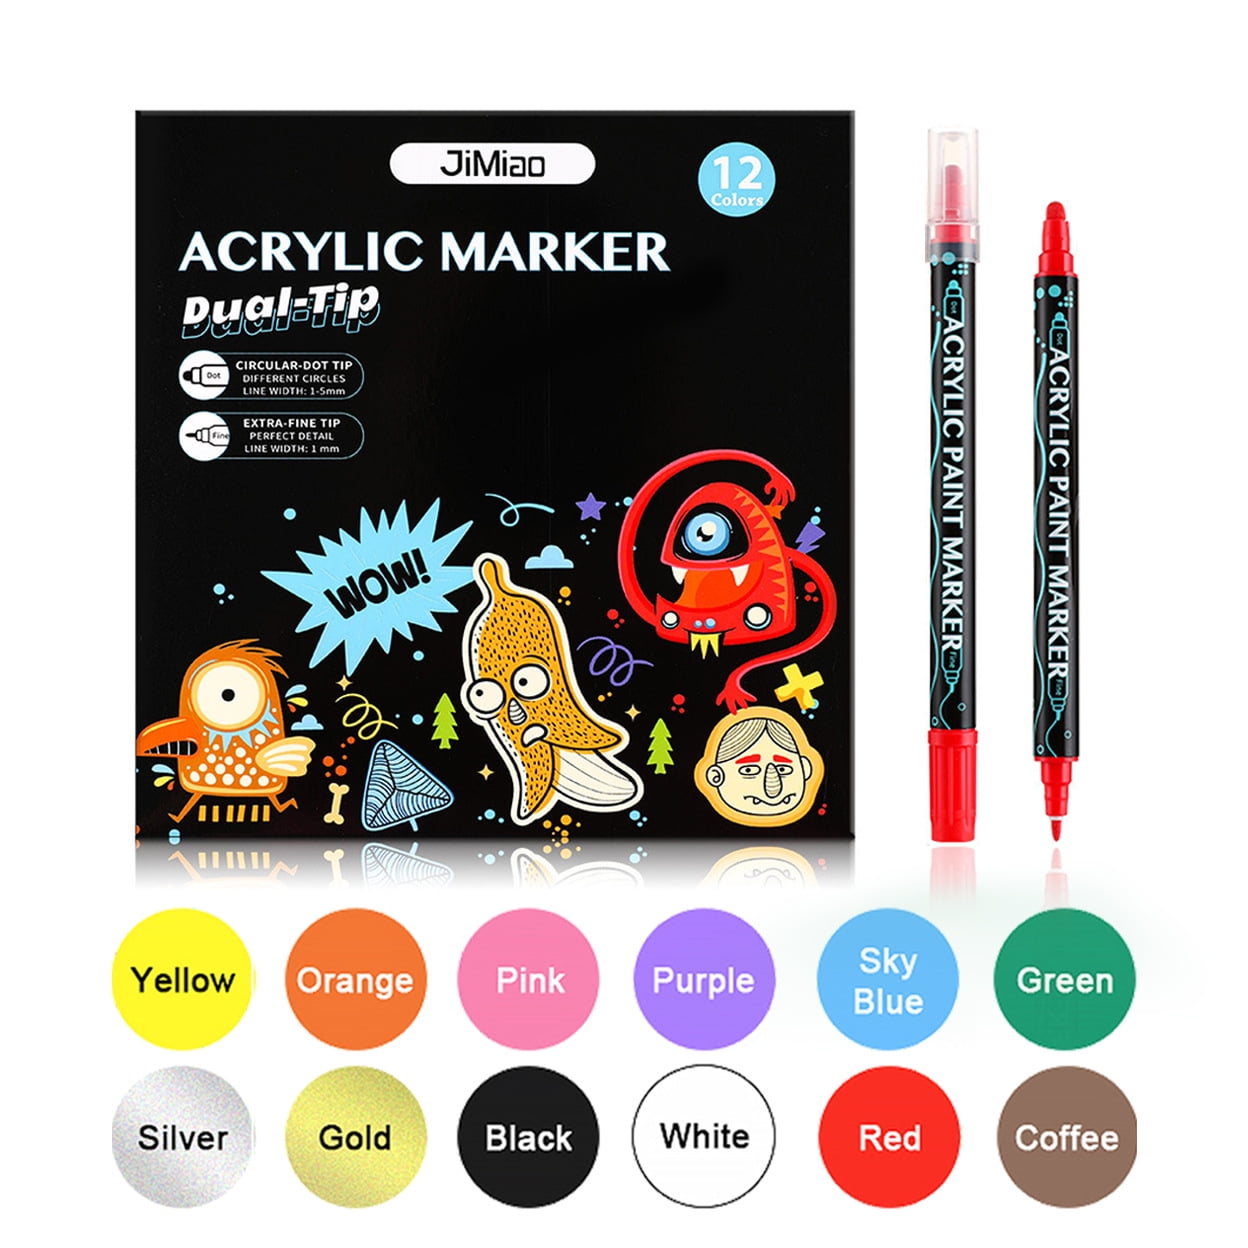 Acrylic Paint Markers, 24 Colors Lelix Permanent Acrylic Paint Pens for  Rock, Glass Painting, Ceramic, Wood, Canvas, Fabric